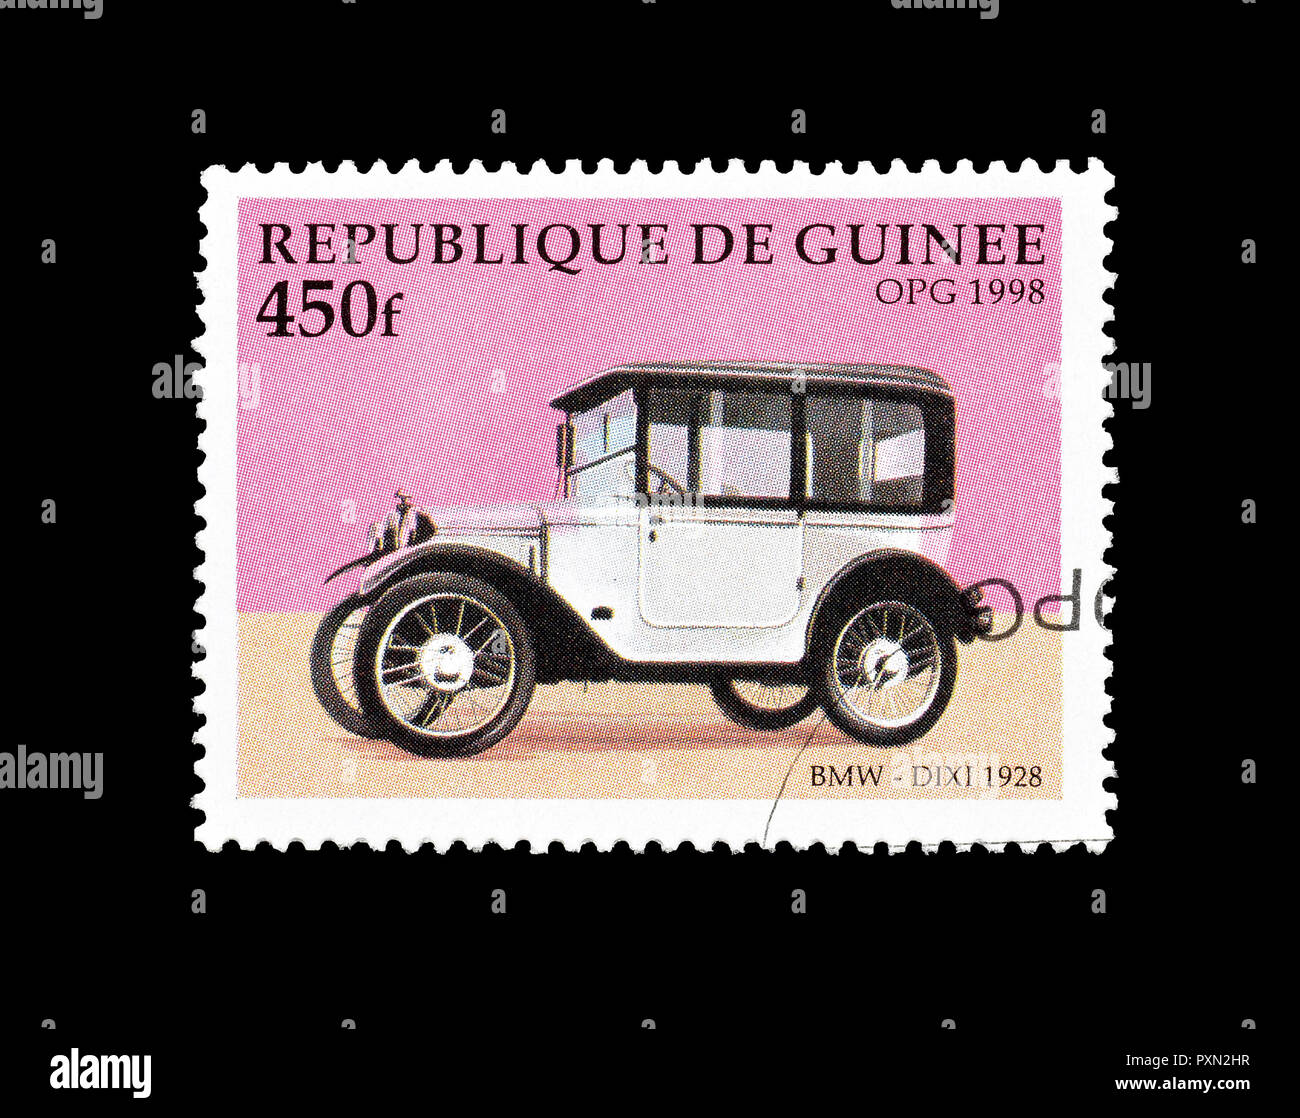 Cancelled postage stamp printed by Guinea, that shows BMW dixi vehicle from 1928, circa 1998. Stock Photo